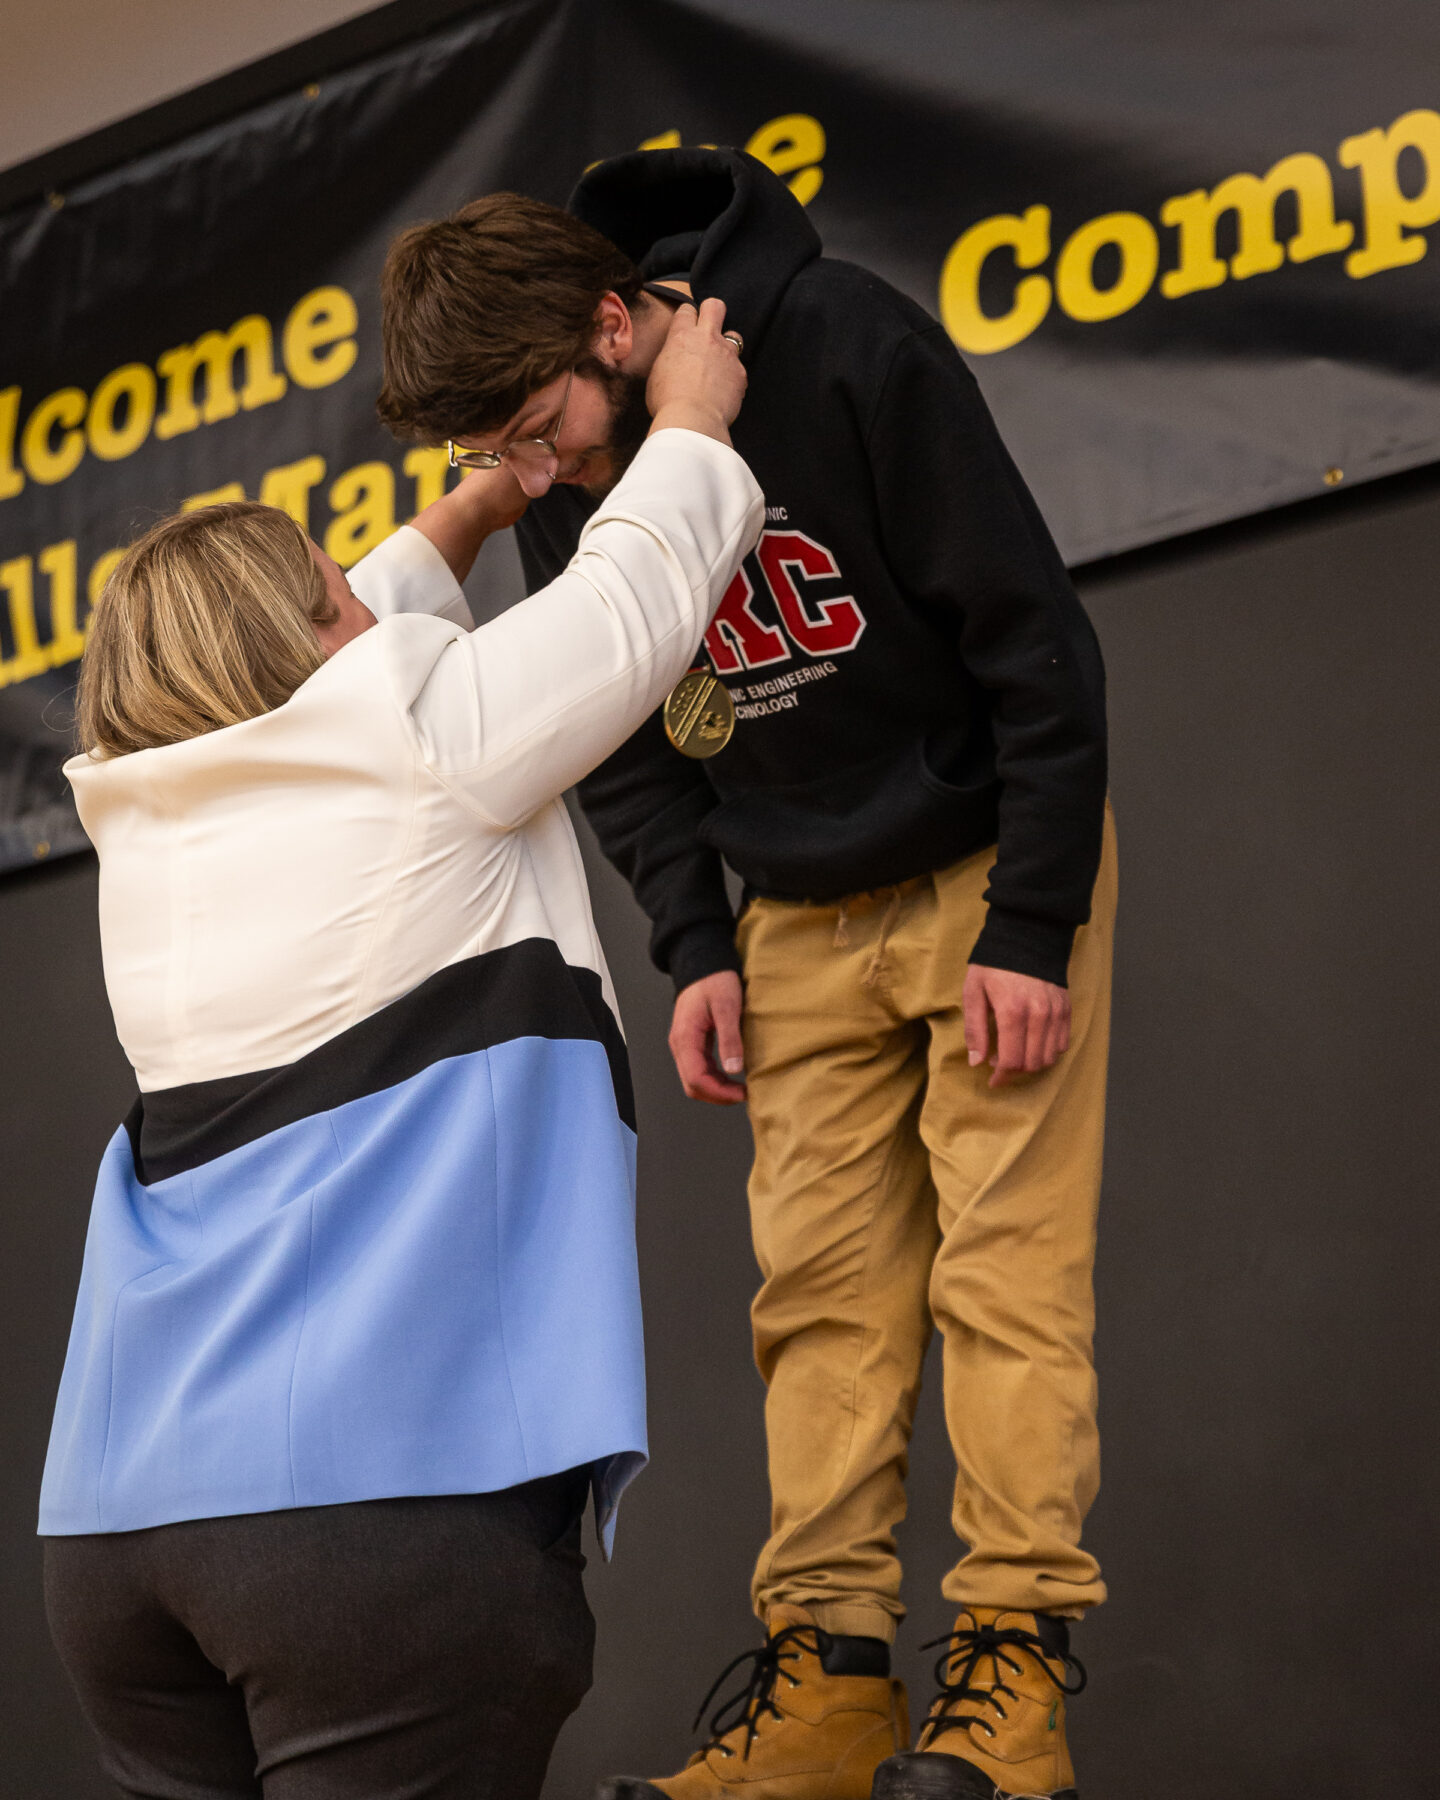 Student wearing an RRC Polytech sweater leans forward on a stage as a woman drapes a medal around the student's neck.